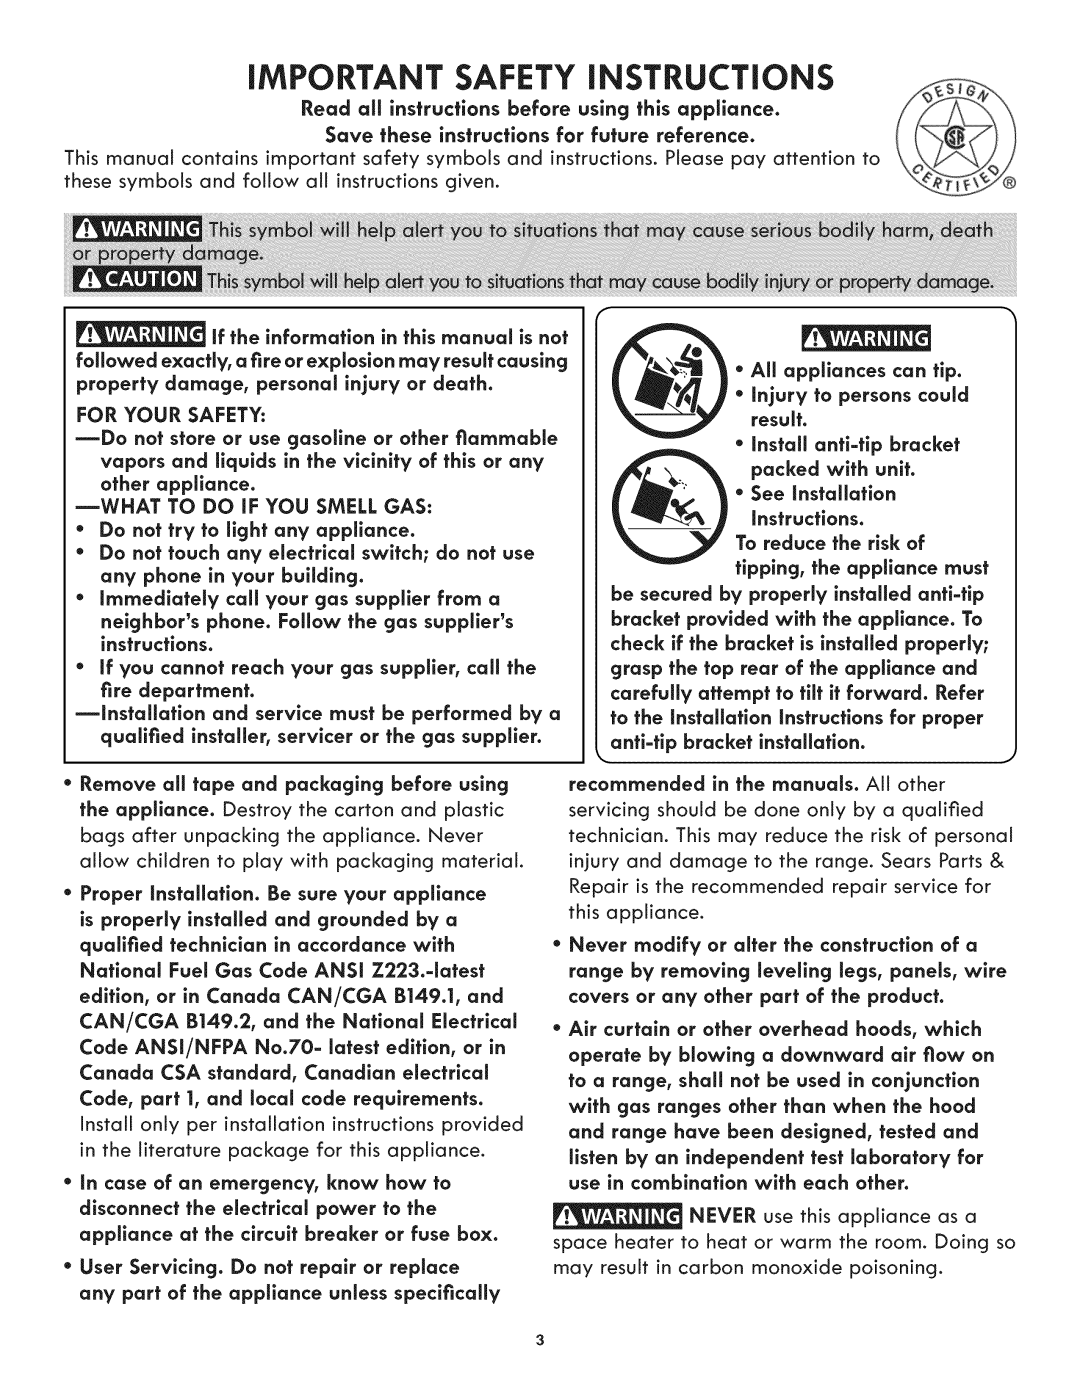 Kenmore 790.3105 manual iMPORTANT SAFETY iNSTRUCTiONS 